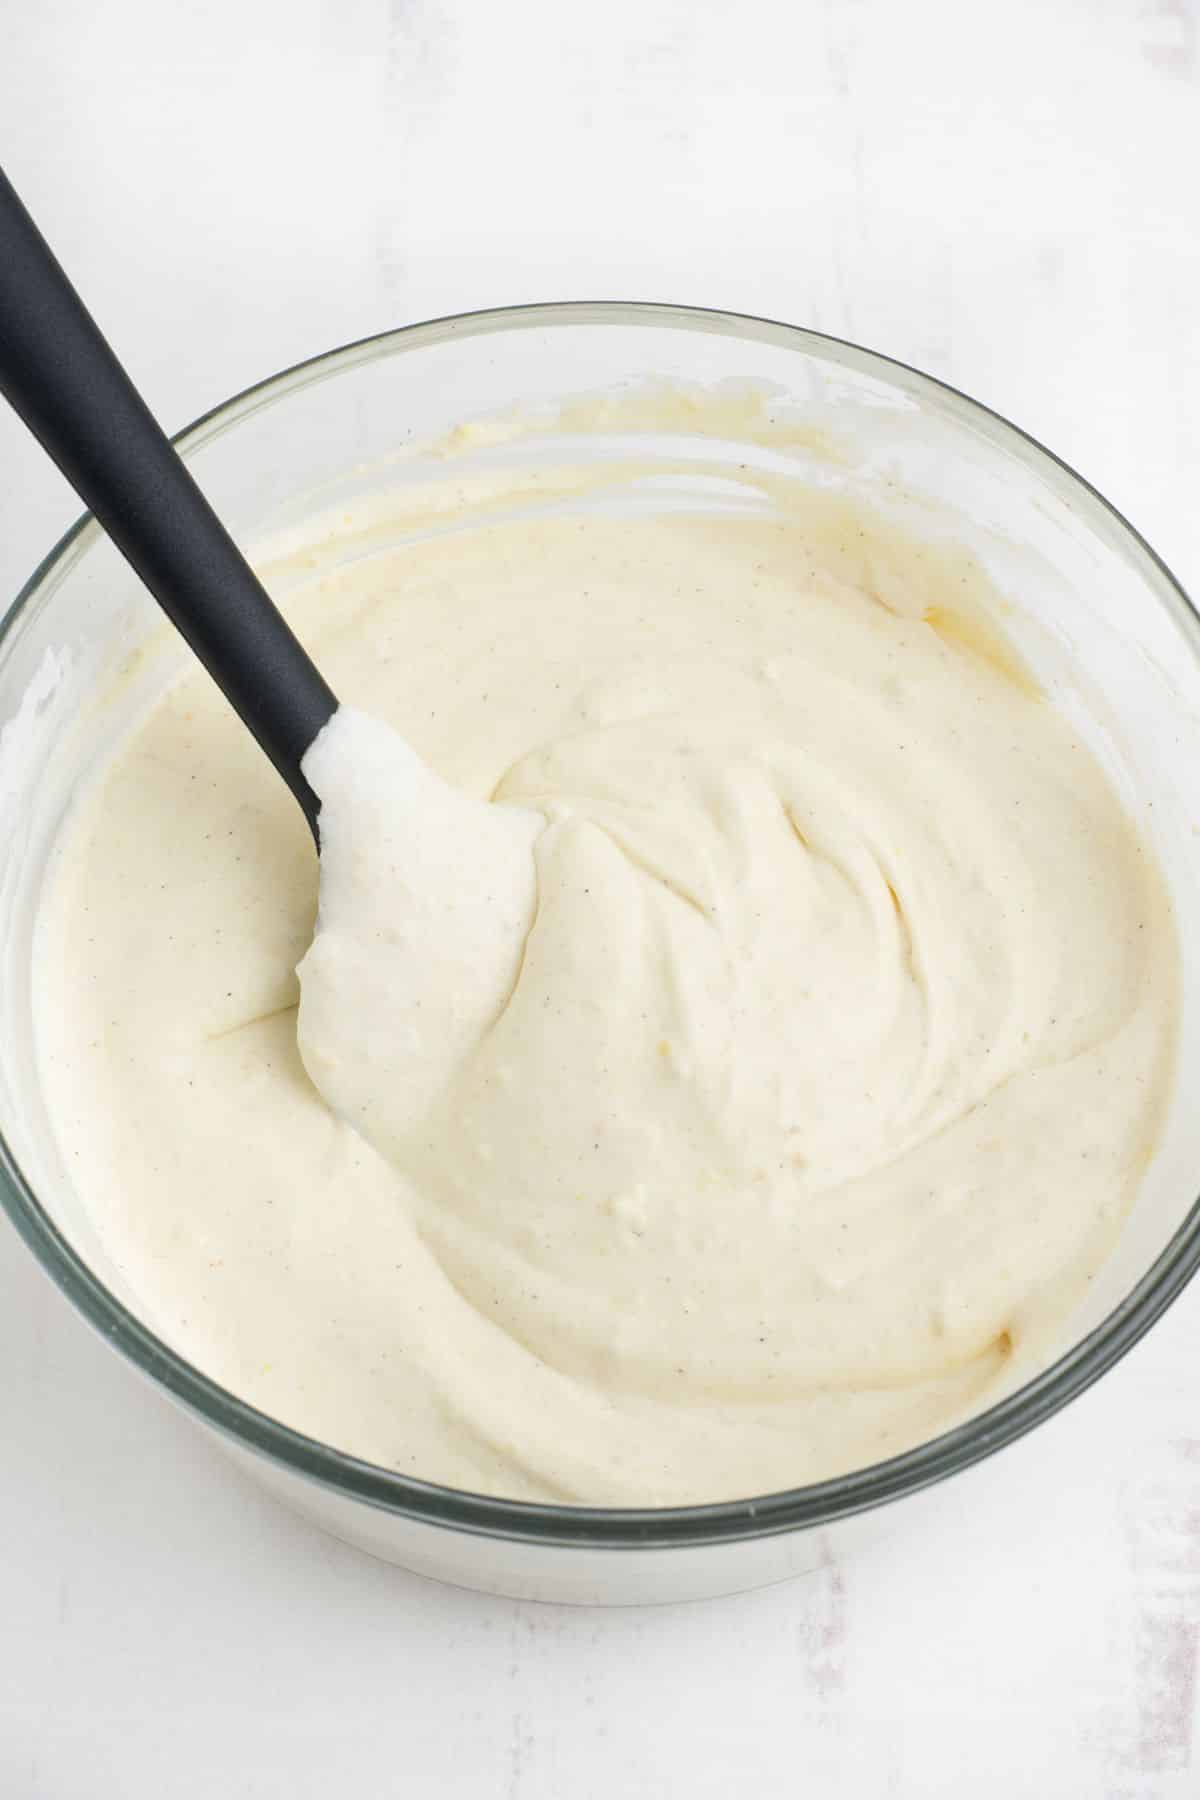 Eggnog dip mixed together with a spatula in the bowl.